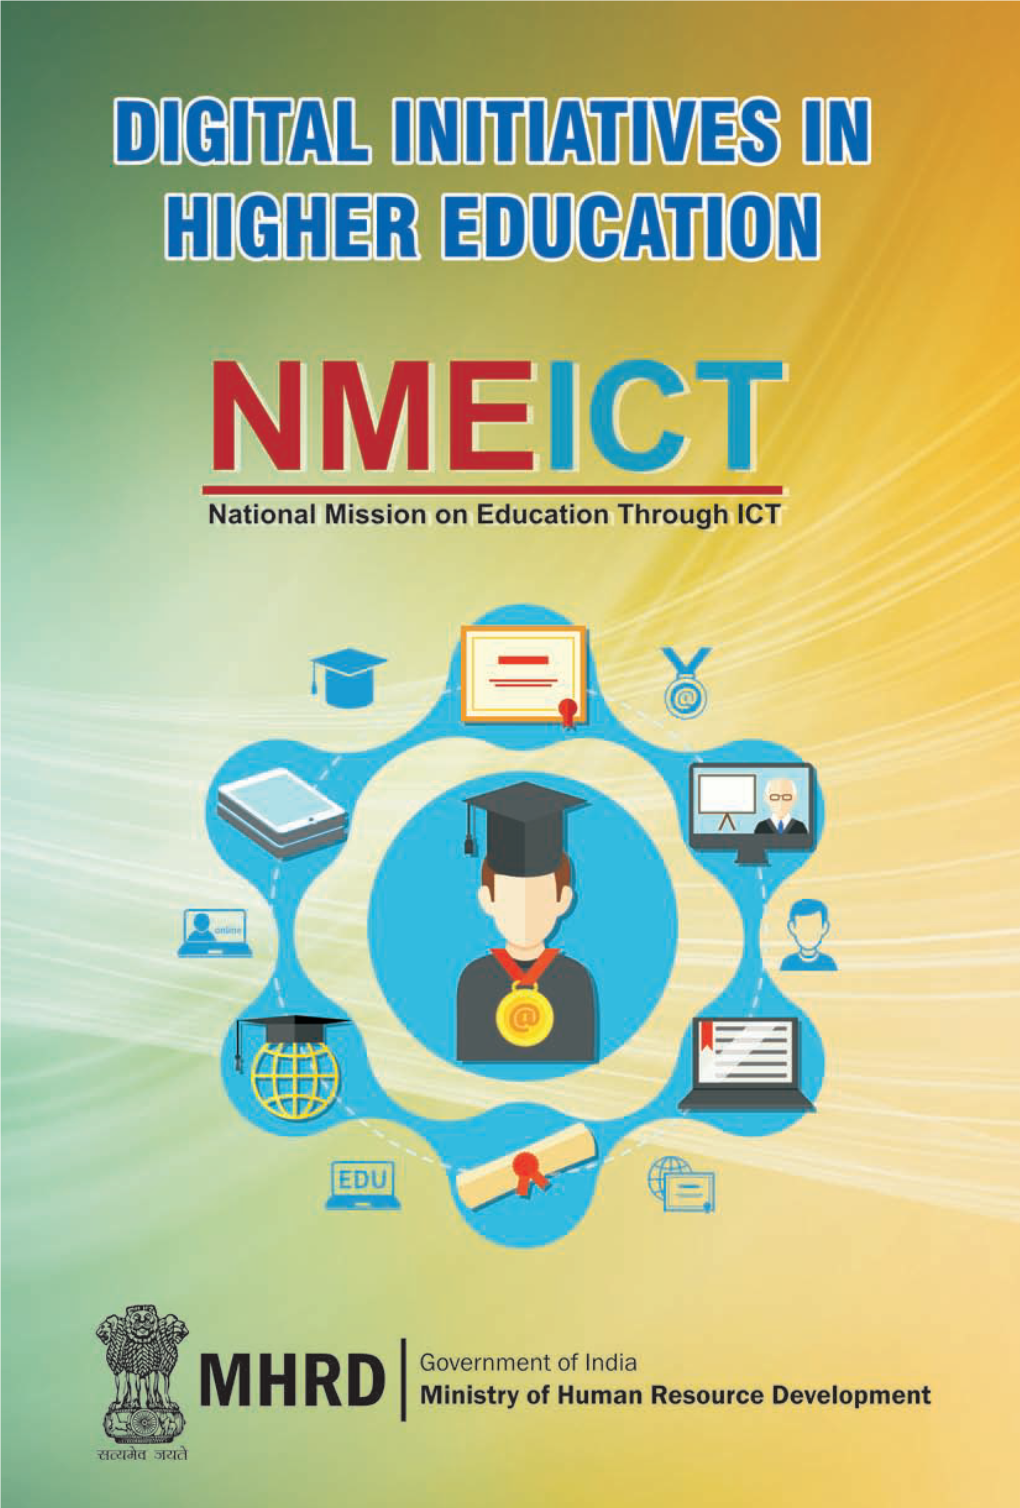 Digital Initiatives in Higher Education by MHRD